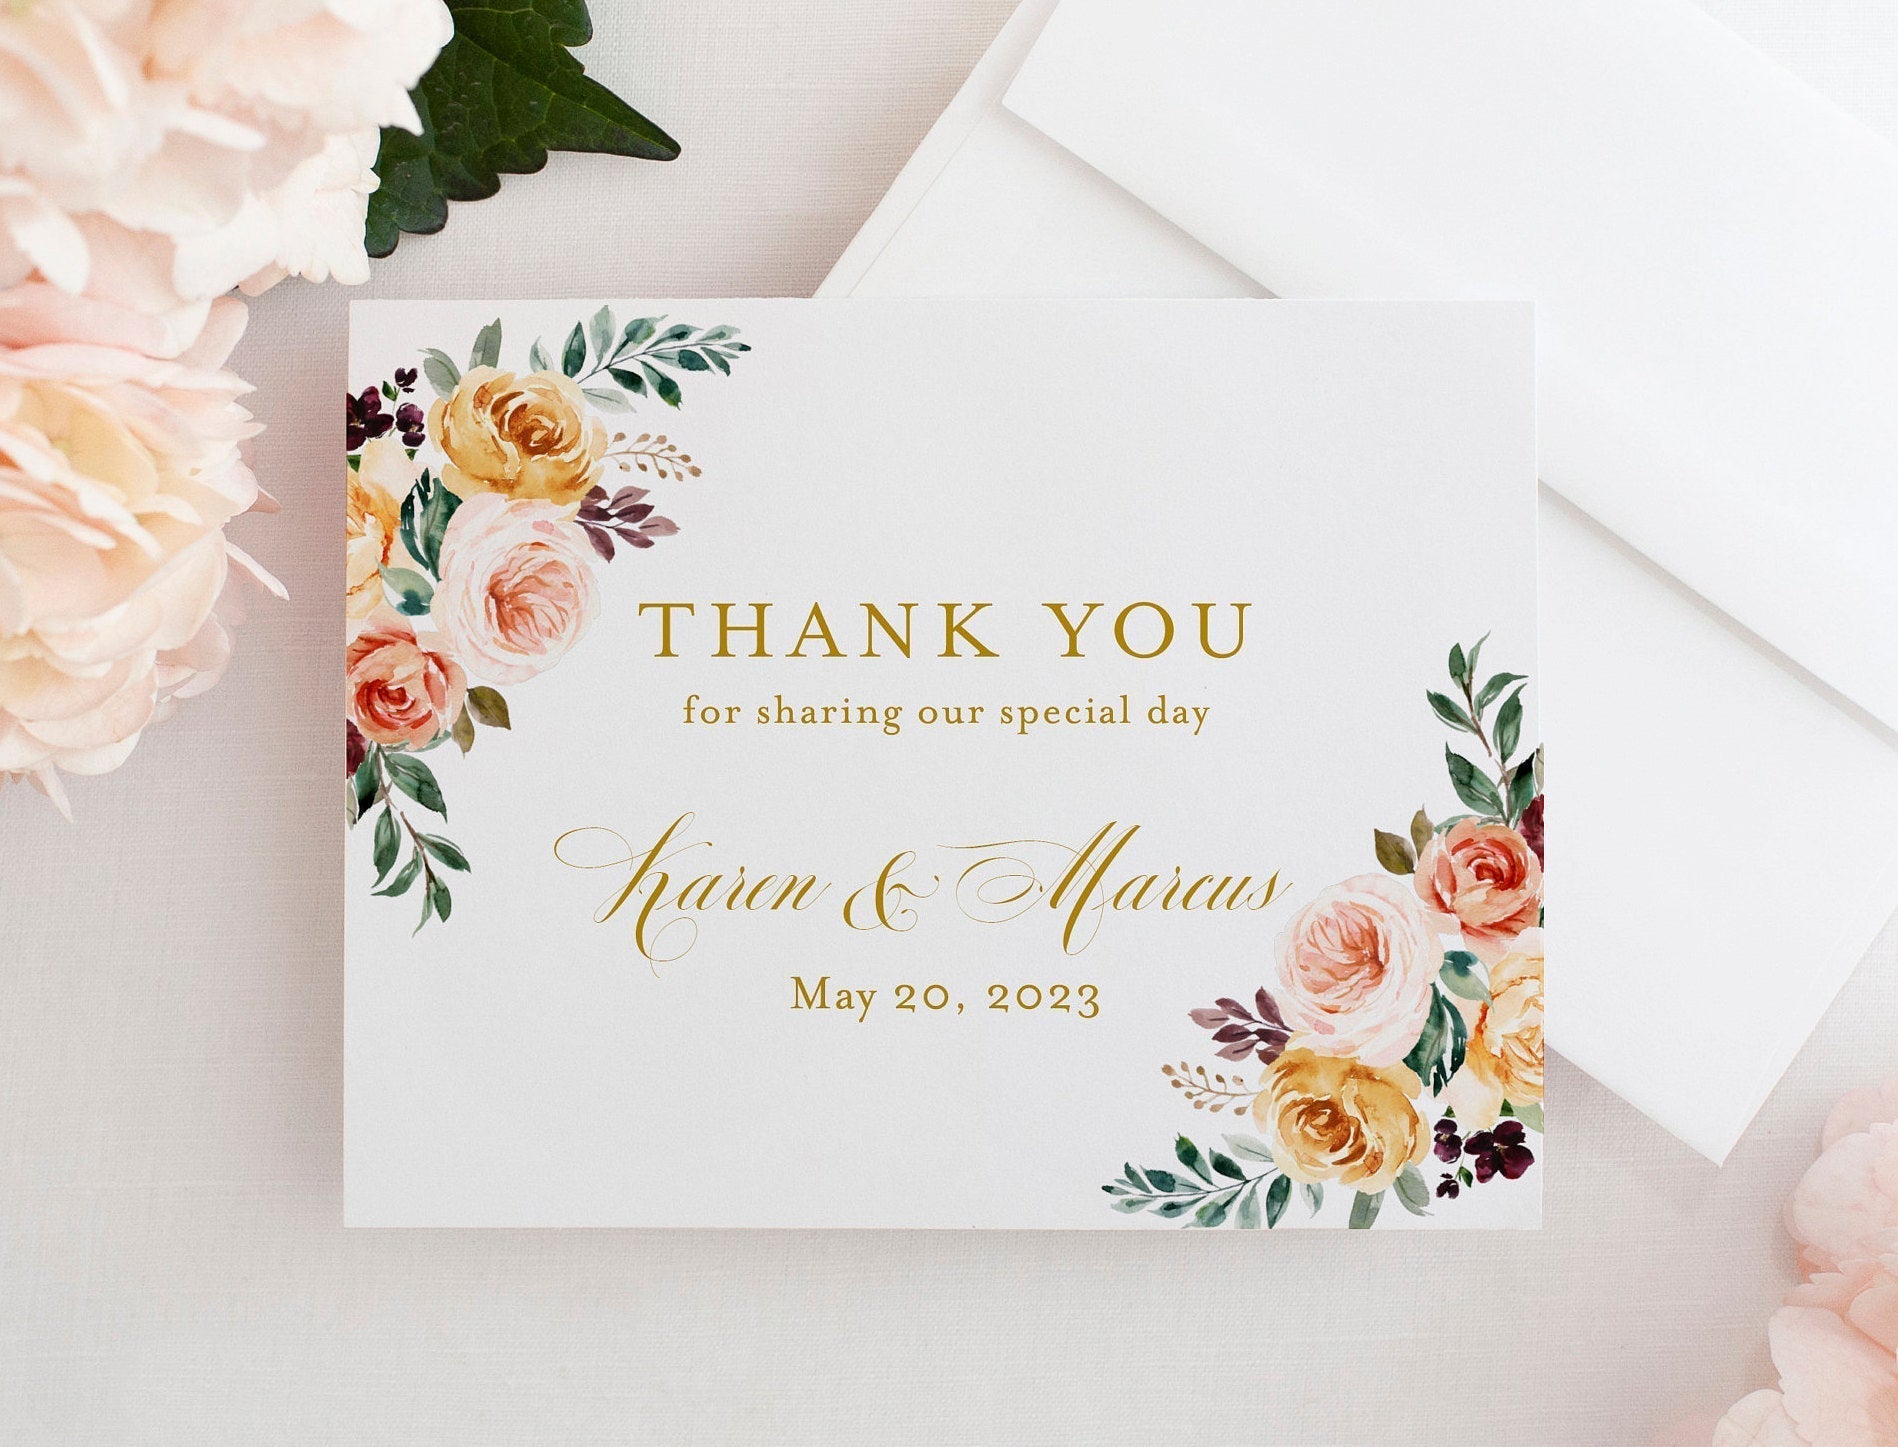 Fall Wedding Thank You Card Instant Download Thank you Cards Printable Thank You Wedding Cards Floral Watercolor  - Karen TAGS | TY | INSERTS SAVVY PAPER CO